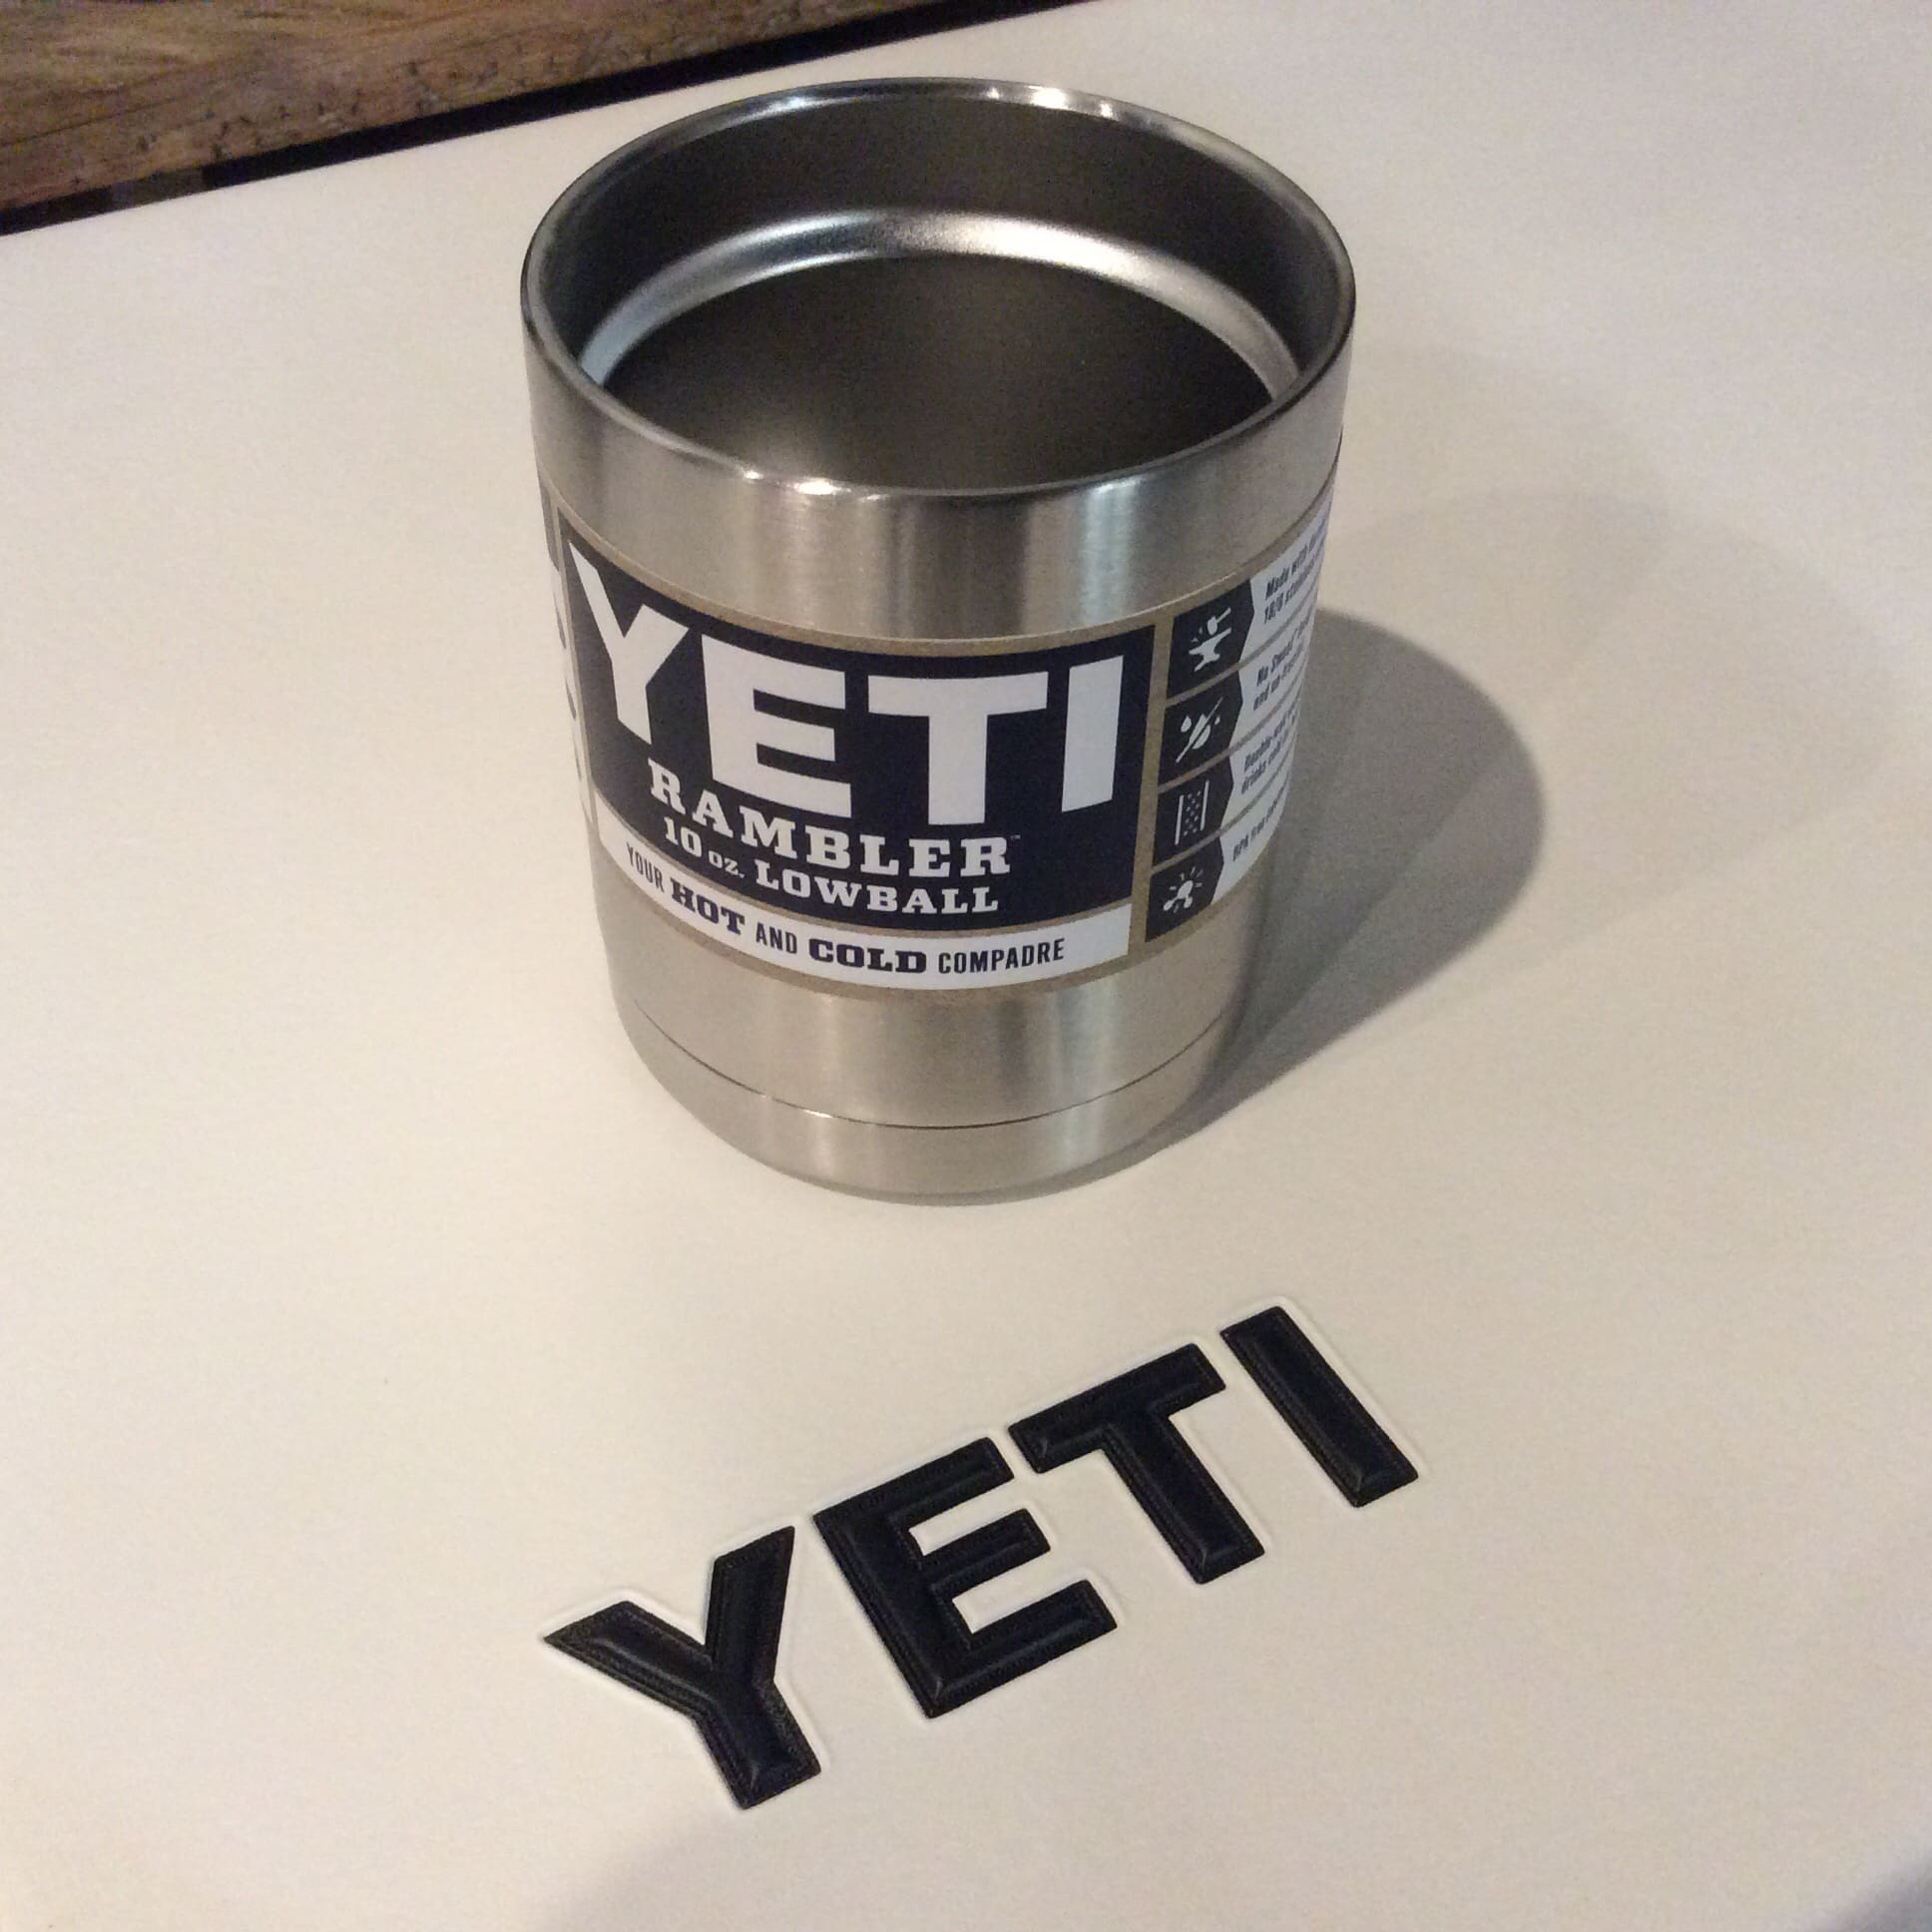 OR – Yeti Coolers - Soldier Systems Daily